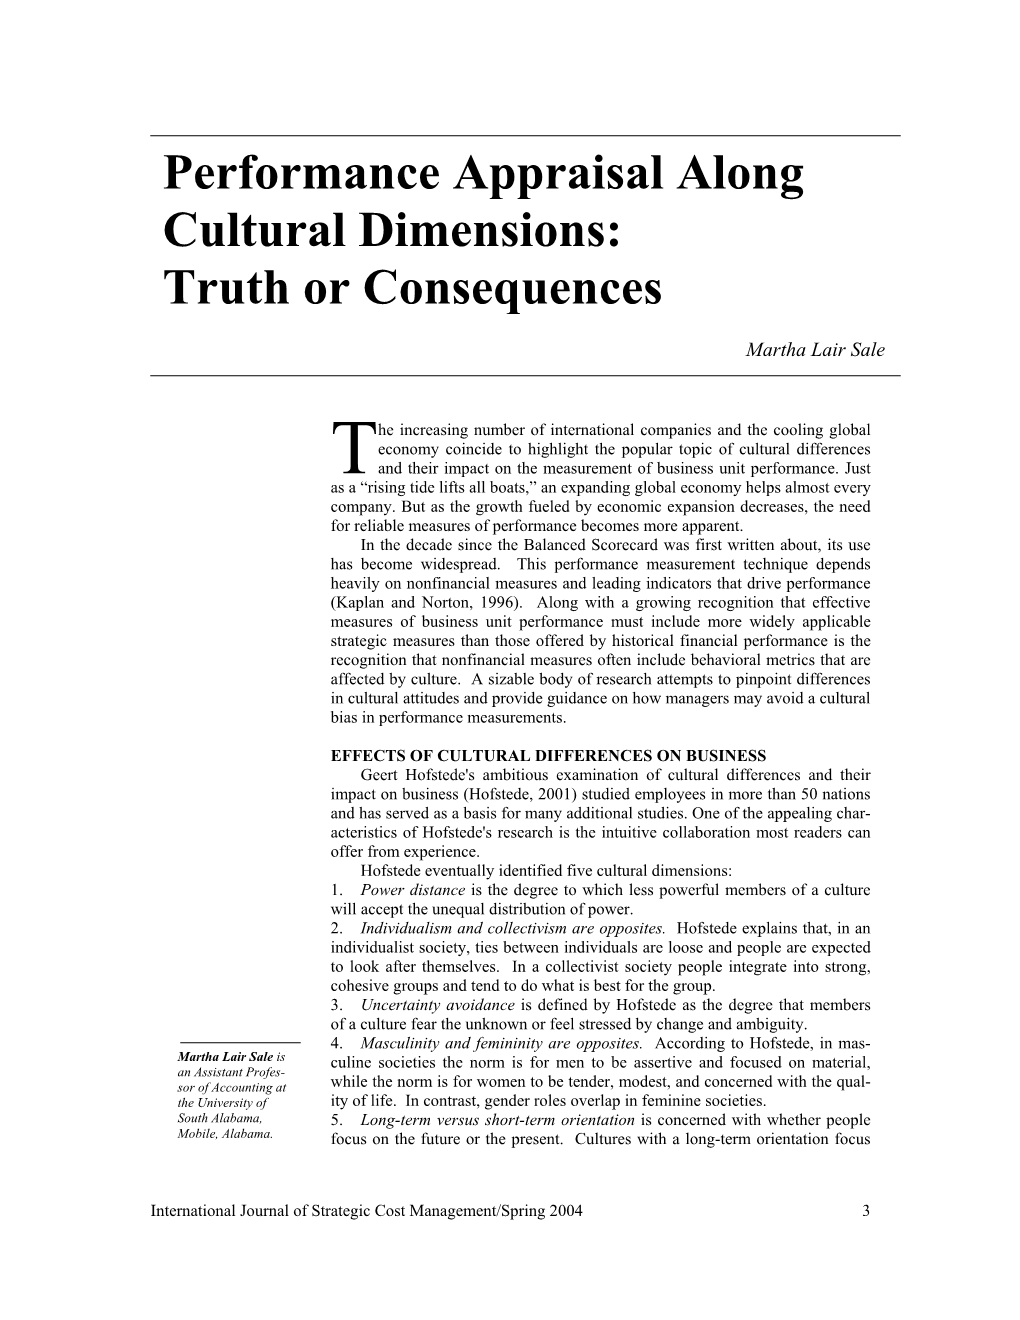 Performance Appraisal Along Cultural Dimensions: Truth Or Consequences